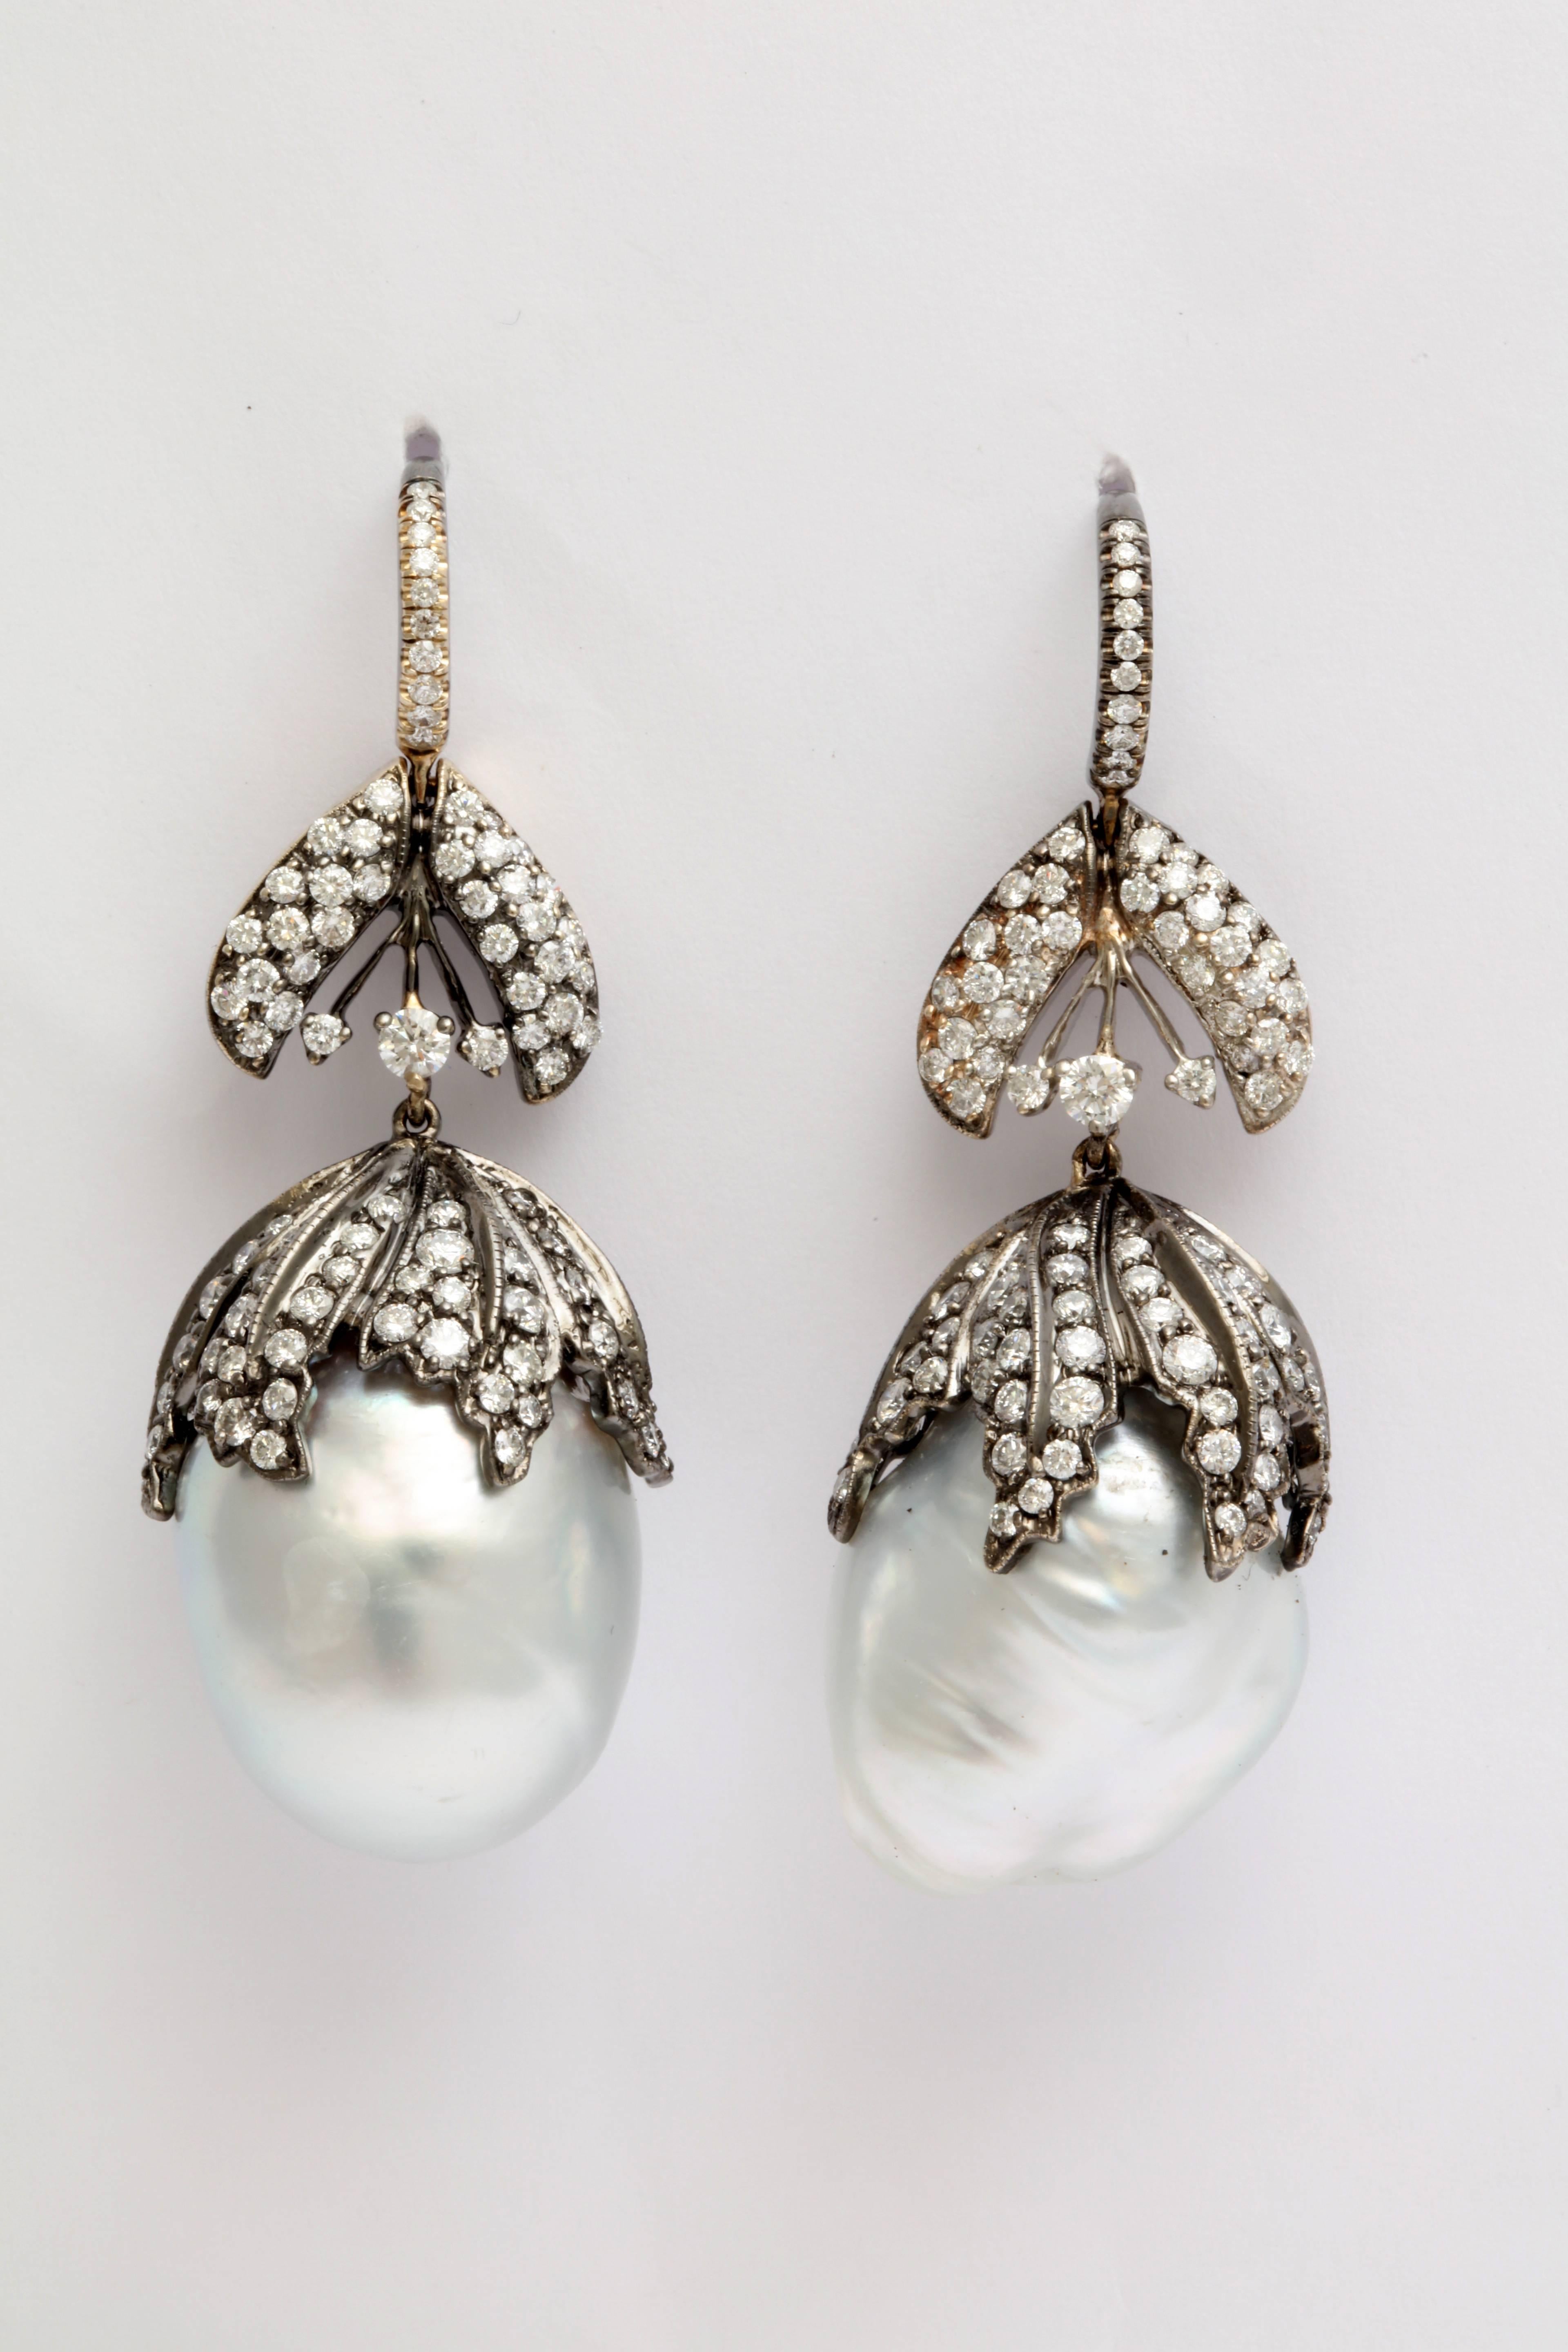 A pair of South Sea baroque pearl and diamond earrings. The earrings are composed of baroque pearls with 18kt white gold and diamond leaf caps that are suspended from18kt white gold and diamond leaf ear wires.
Length: 2.10 inches
Width: .80 inch